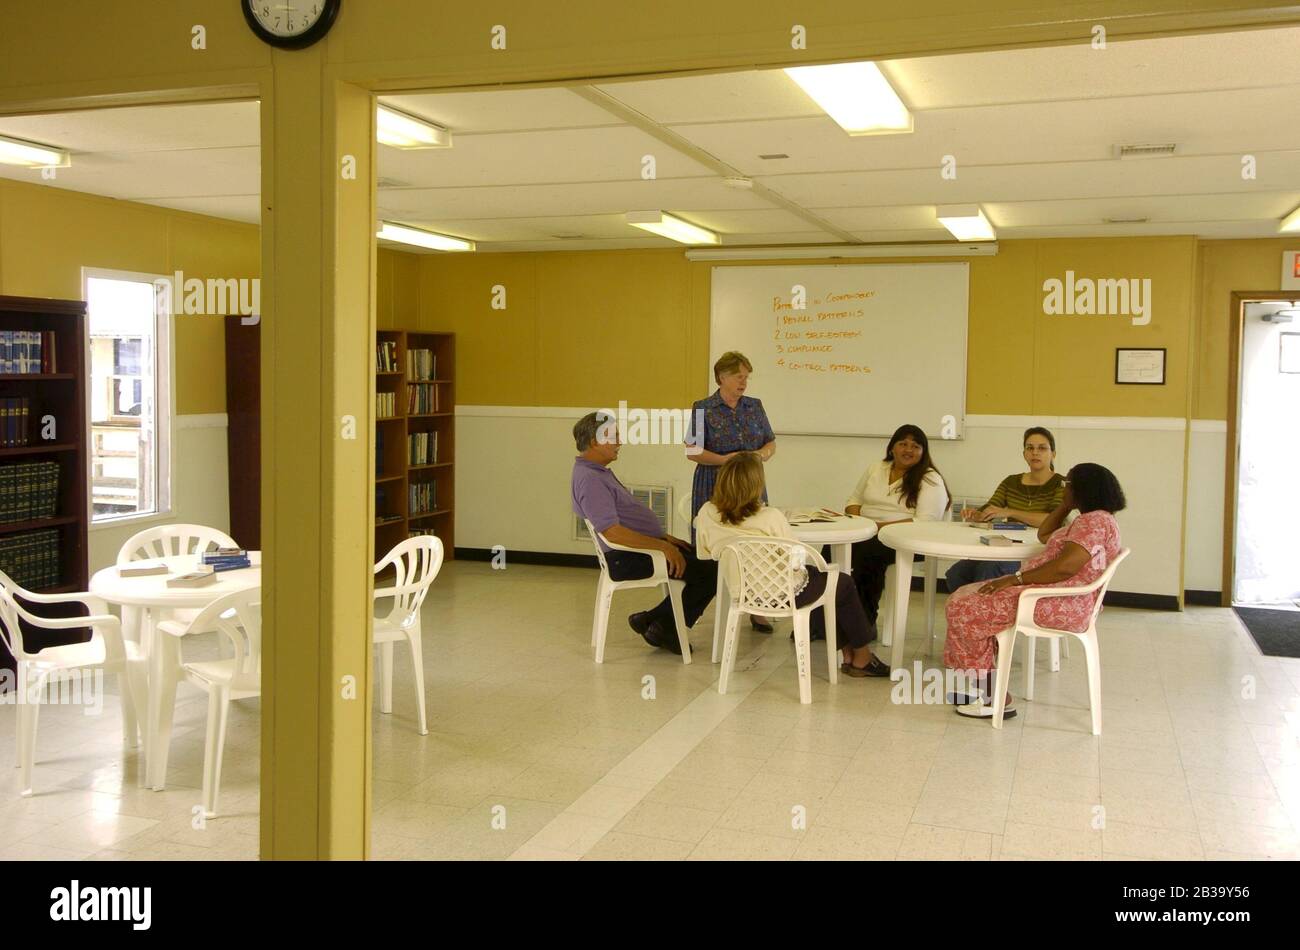 Del Valle, Texas  USA, Oct. 25 2004: Residents meet for a counseling session in the community room of the Austin Transition Center, a halfway house for parolees making the transition from prison to the free world.  (persons in photograph are models). ©Bob Daemmrich Stock Photo